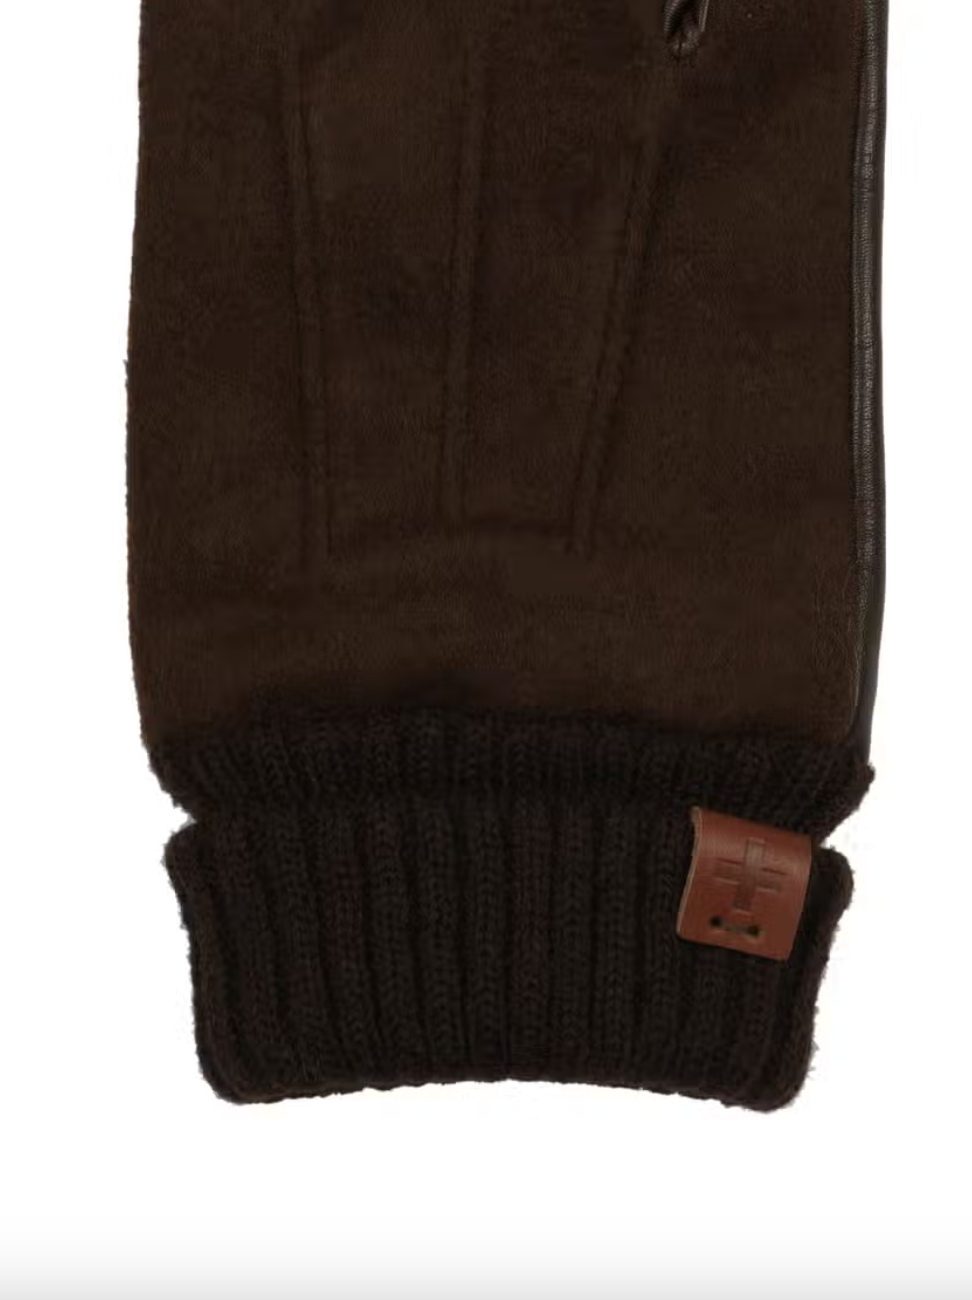 Wool & Leather Gloves - Brown